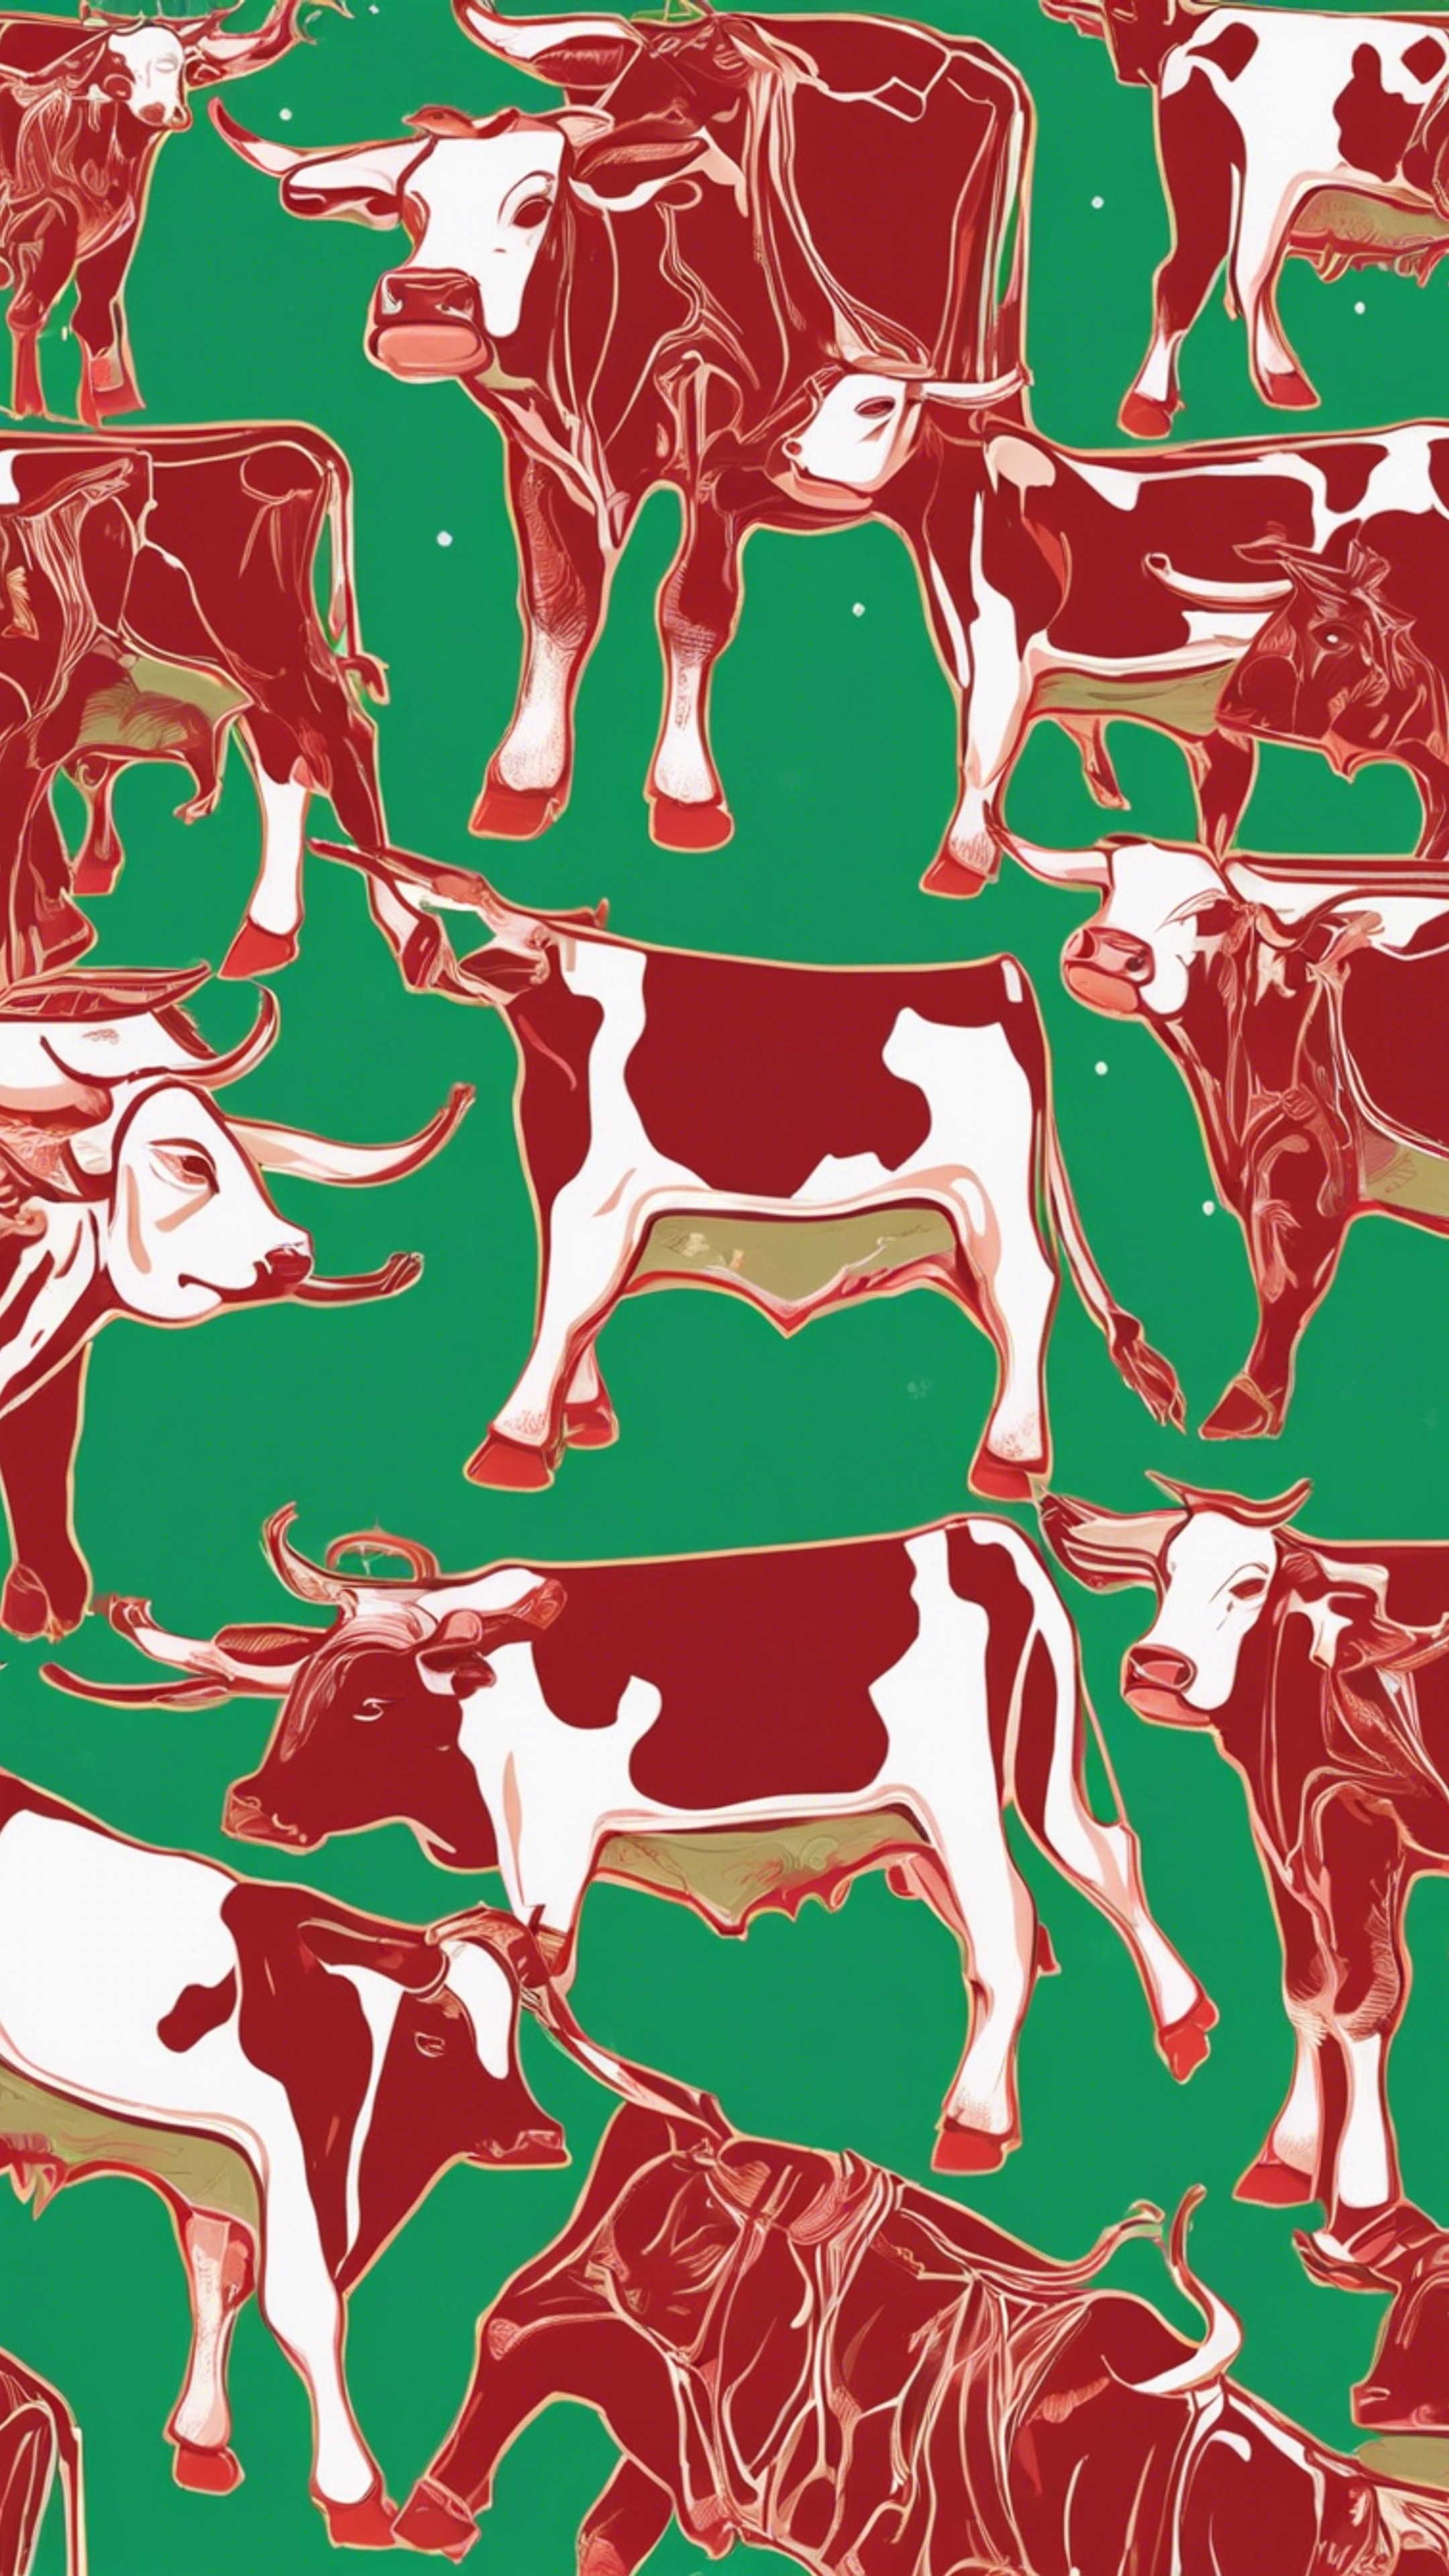 An abstract art featuring earthy green and vibrant red cow patterns. Fond d'écran[bce8b500f11040f088c2]